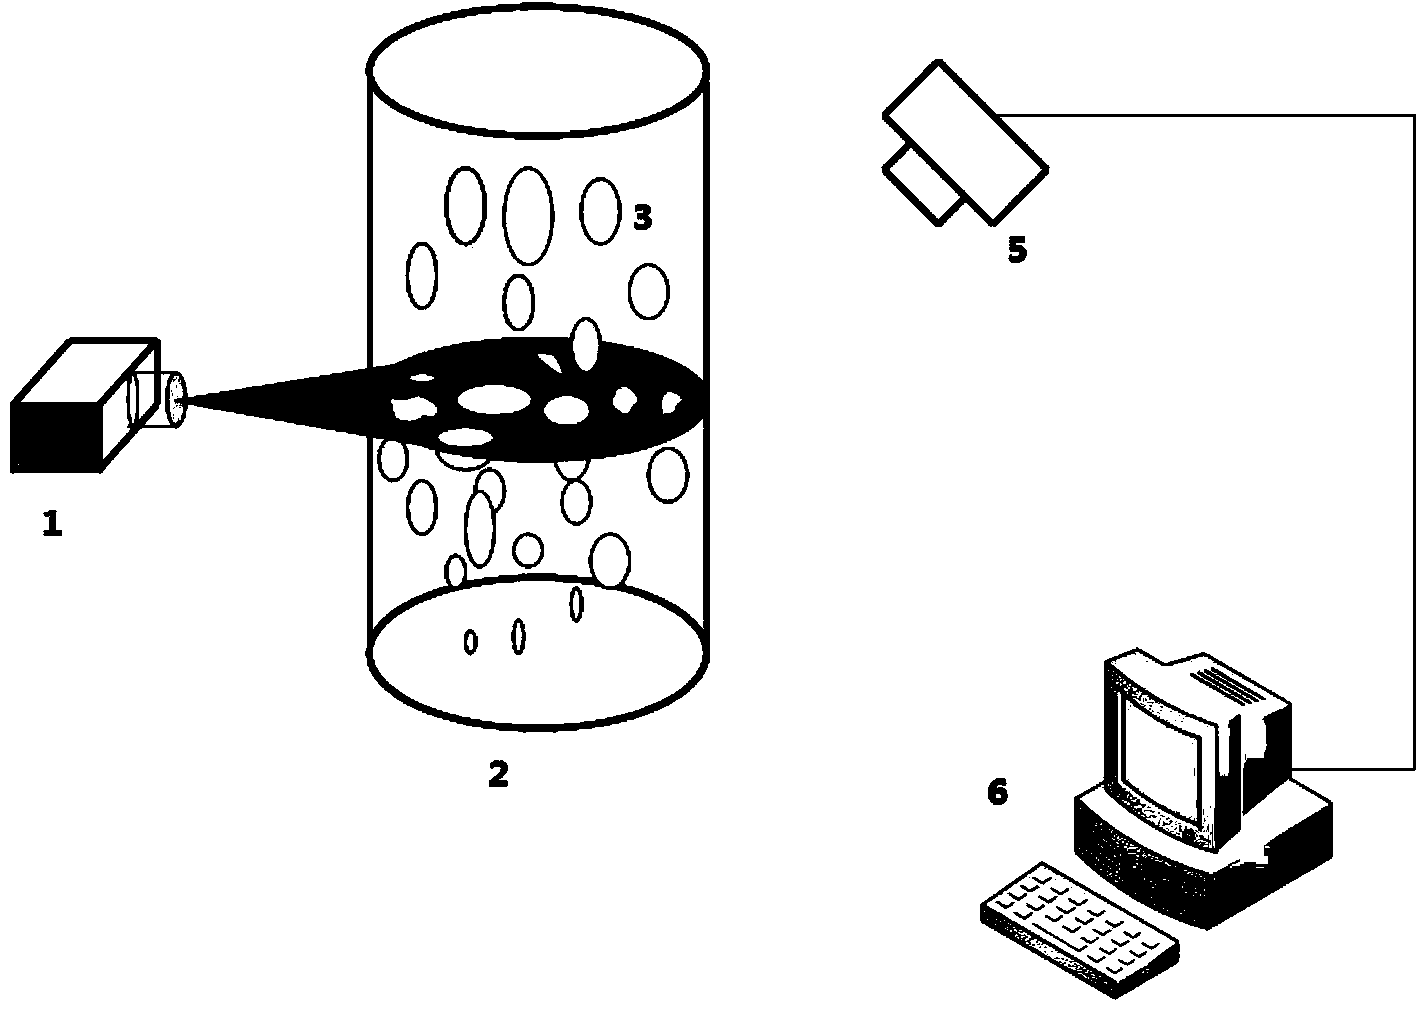 Device for measuring section void fraction of two-phase fluids